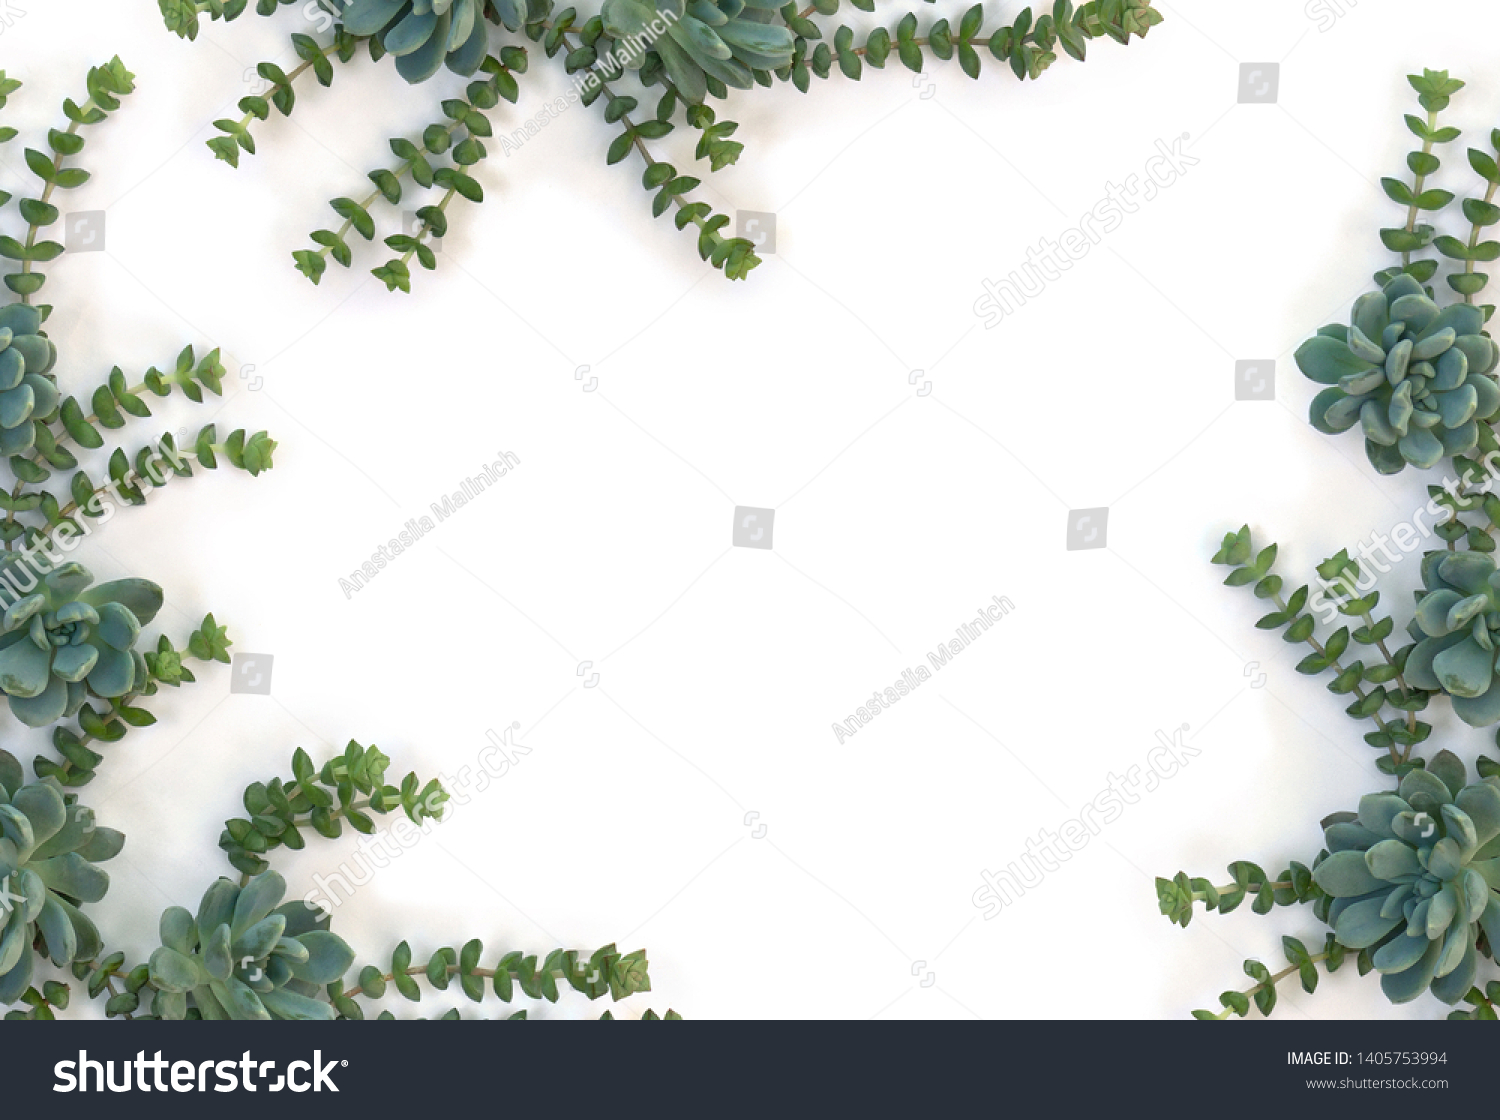 Creative frame of green blue succulents on a white background with space for text. Top view, flat lay  #1405753994